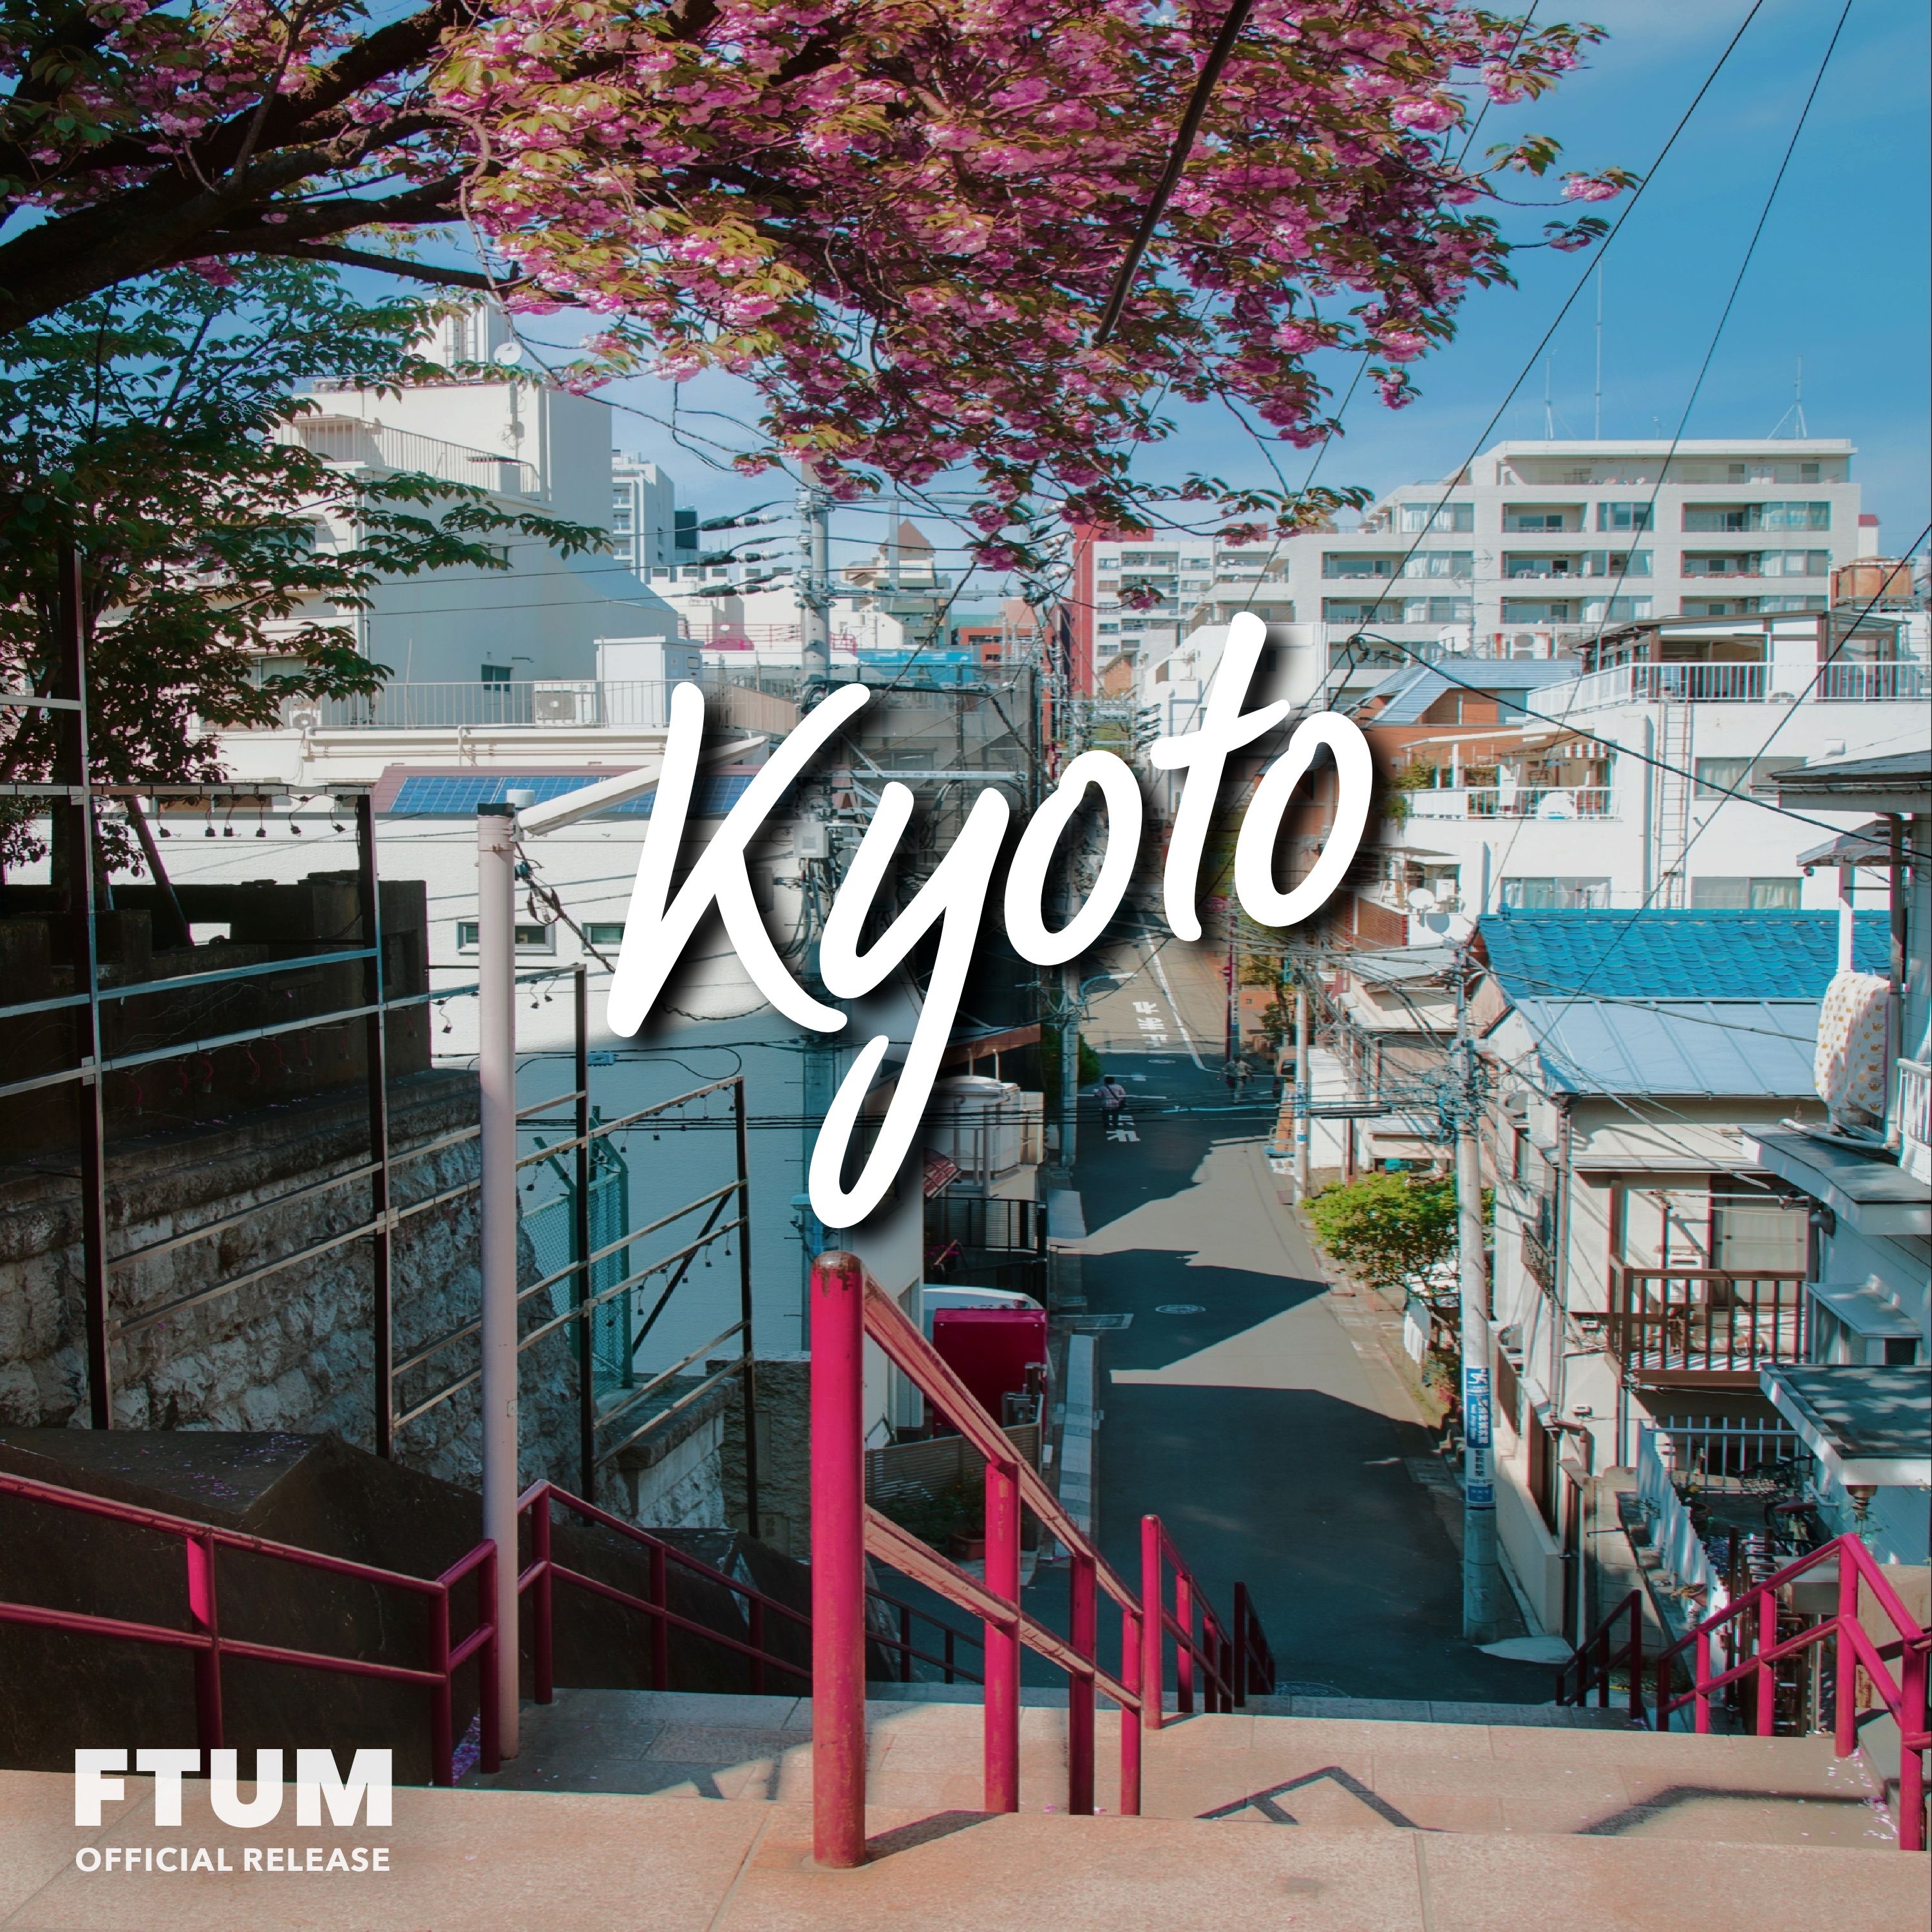 Download Pratzapp & Another Kid - Kyoto [FTUM Release] · Aesthetic Lo-Fi Background Music